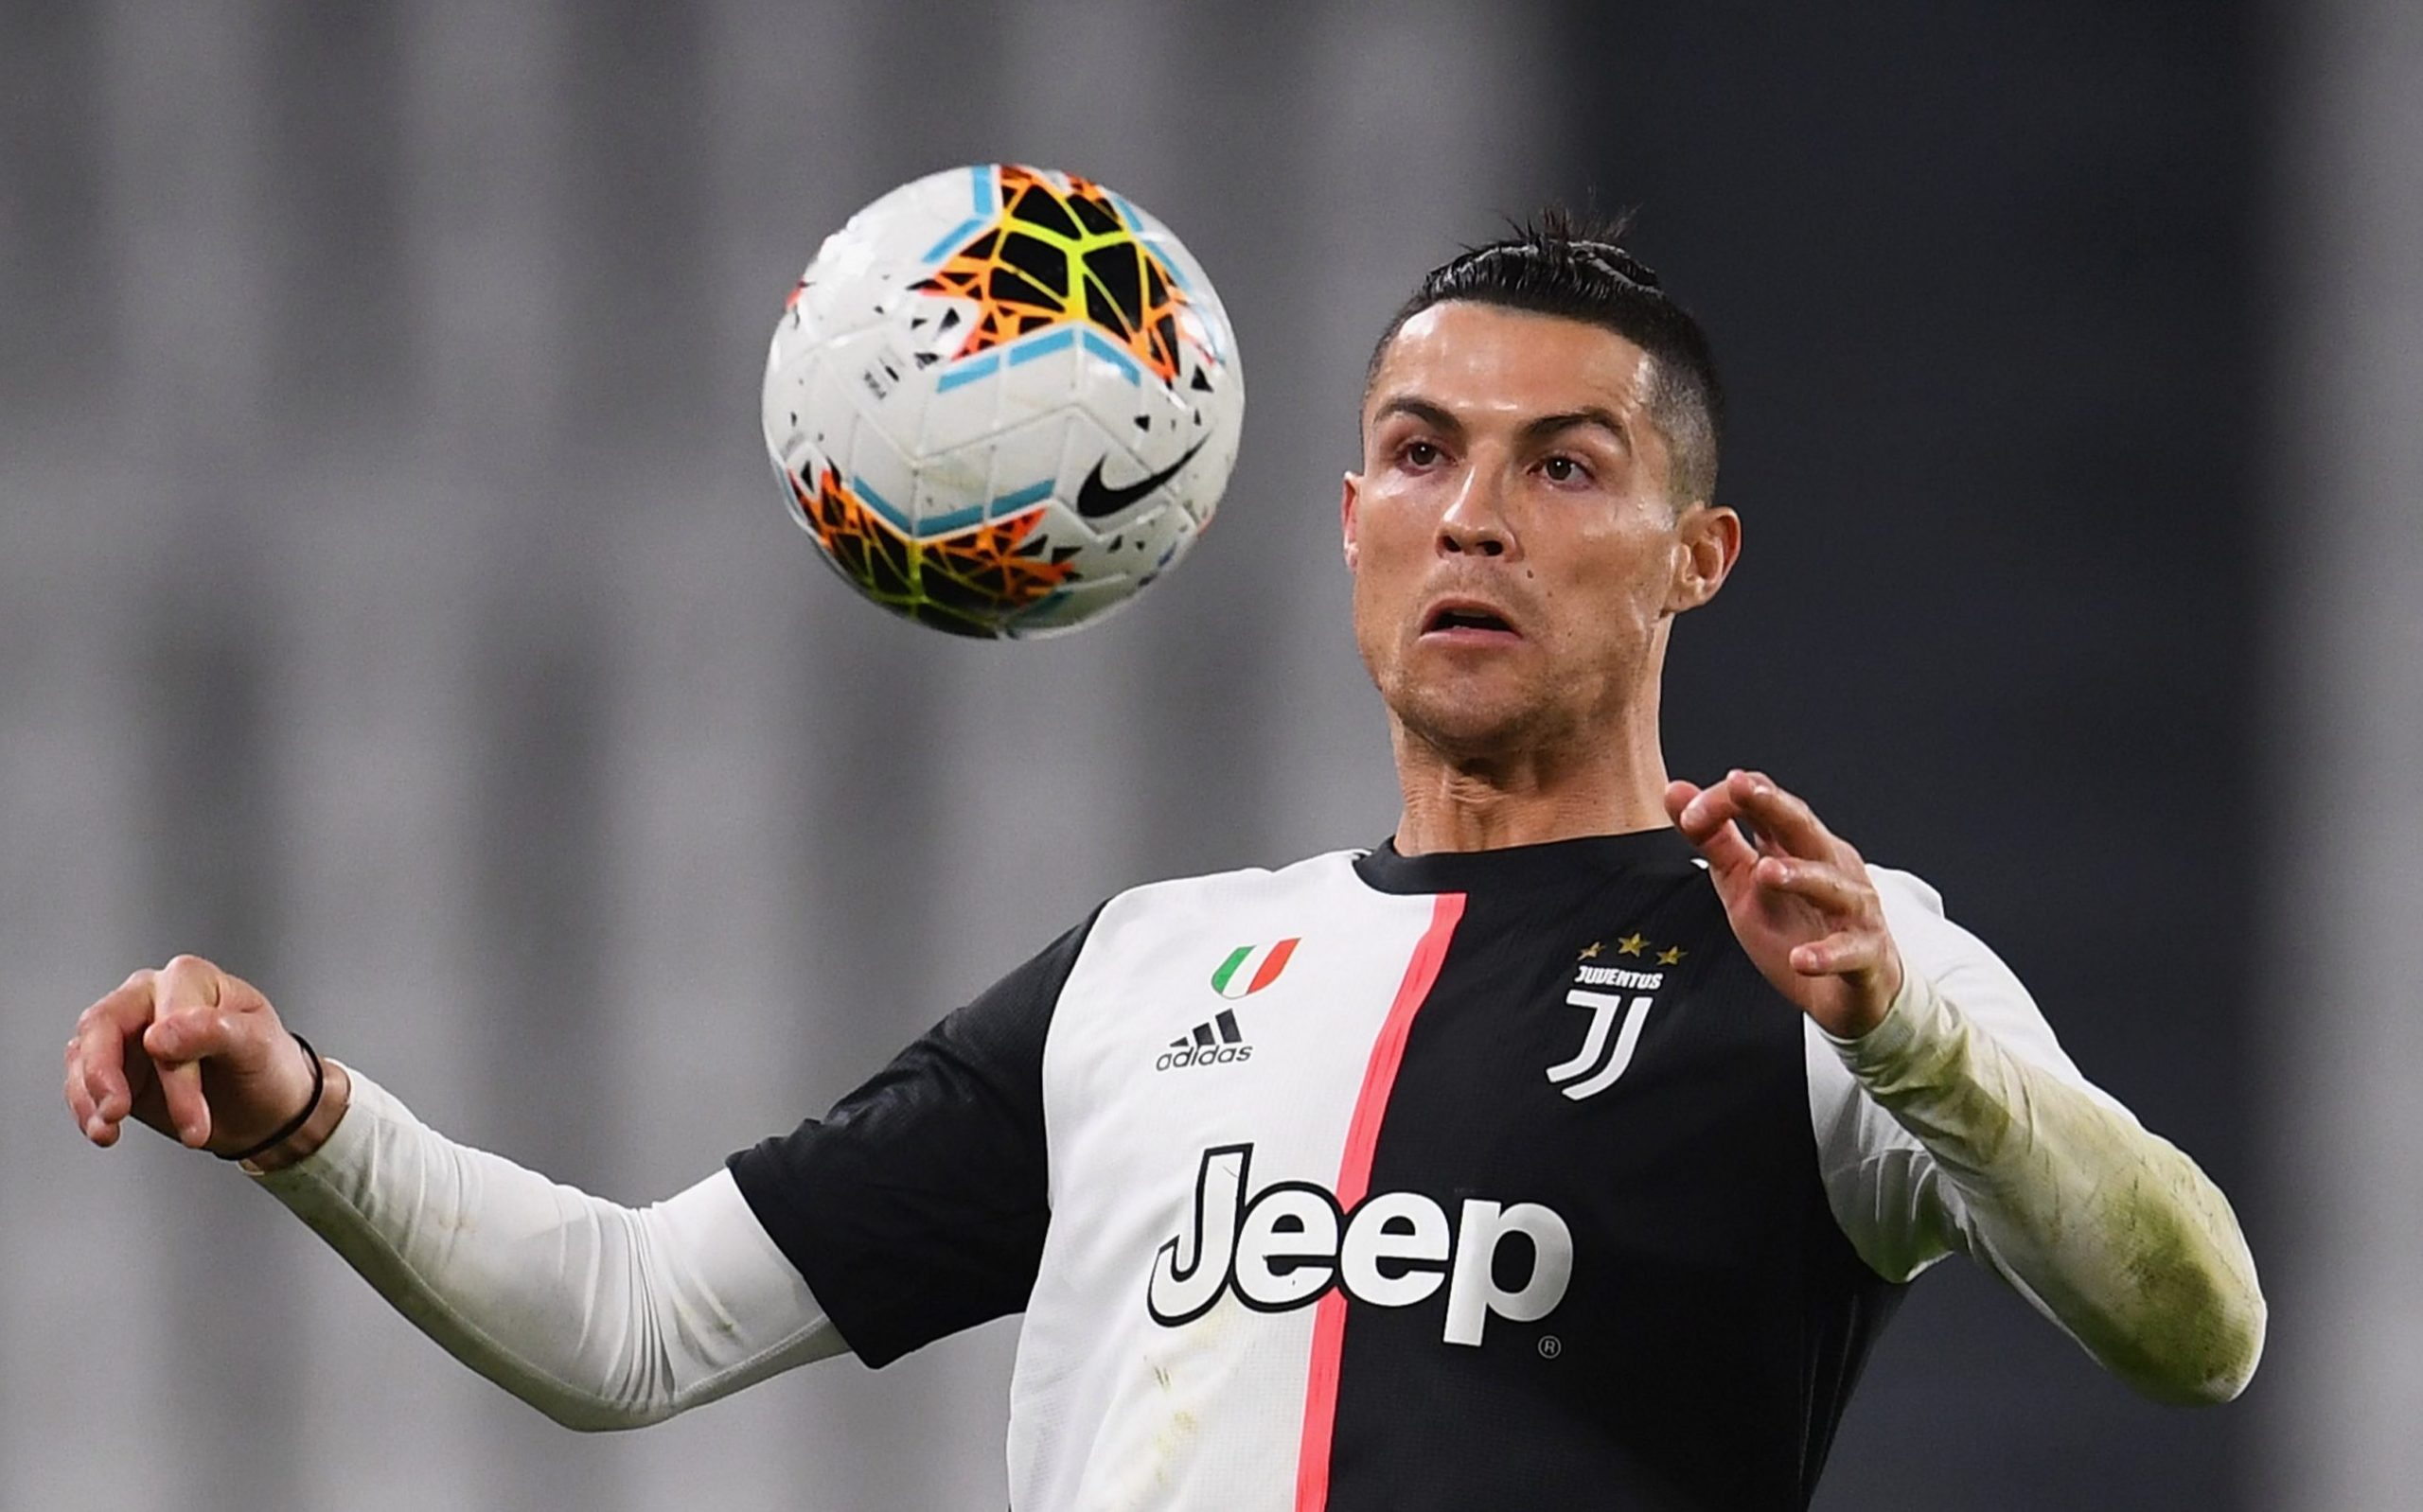 Cristiano Ronaldo and football agent Jorge Mendes joined forces to donate lifesaving equipment to Portuguese hospitals struggling to treat patients with coronavirus. (Image: The Sun)